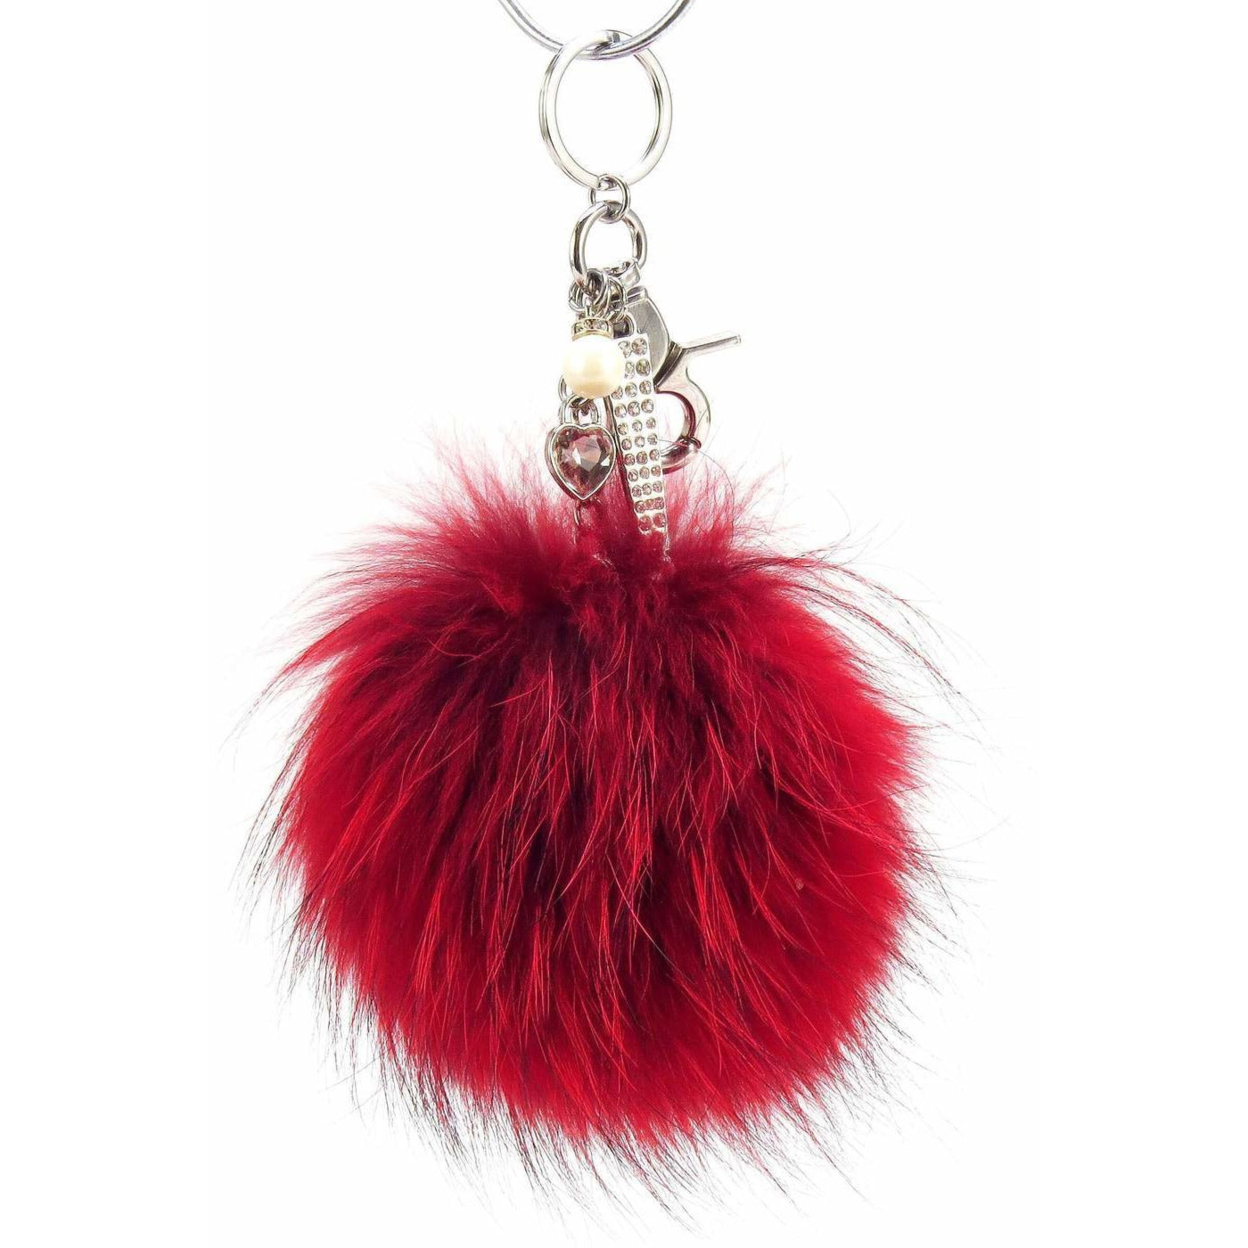 Real Fur Puff Ball Pom-Pom 6 Accessory Dangle Purse Charm - Red With Silver Hardware